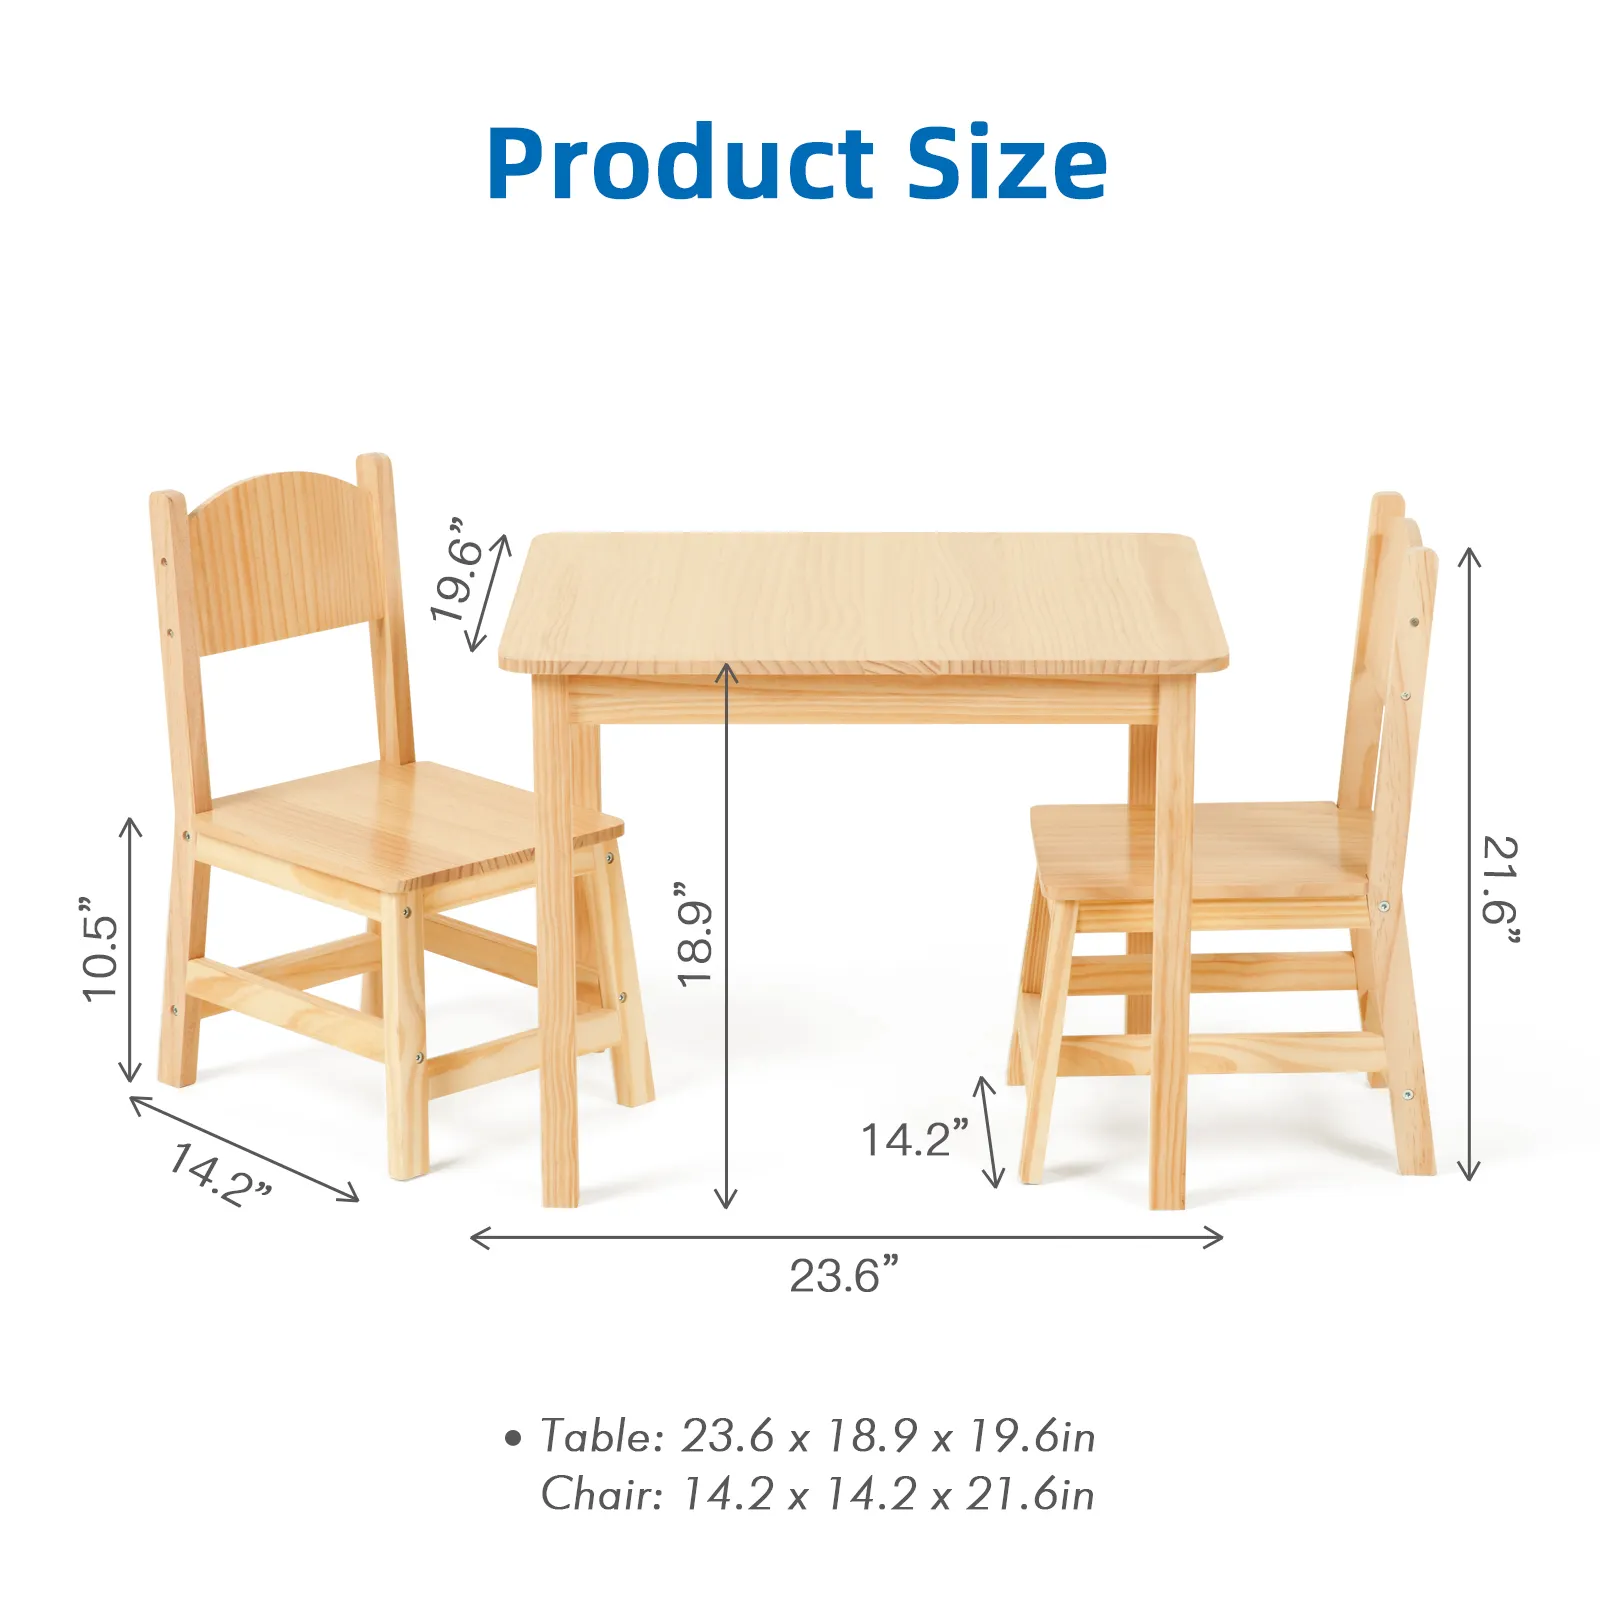 Wooden Children's Furniture Set Preschool Tables and Chairs for Daycare Center Kindergarten Classroom